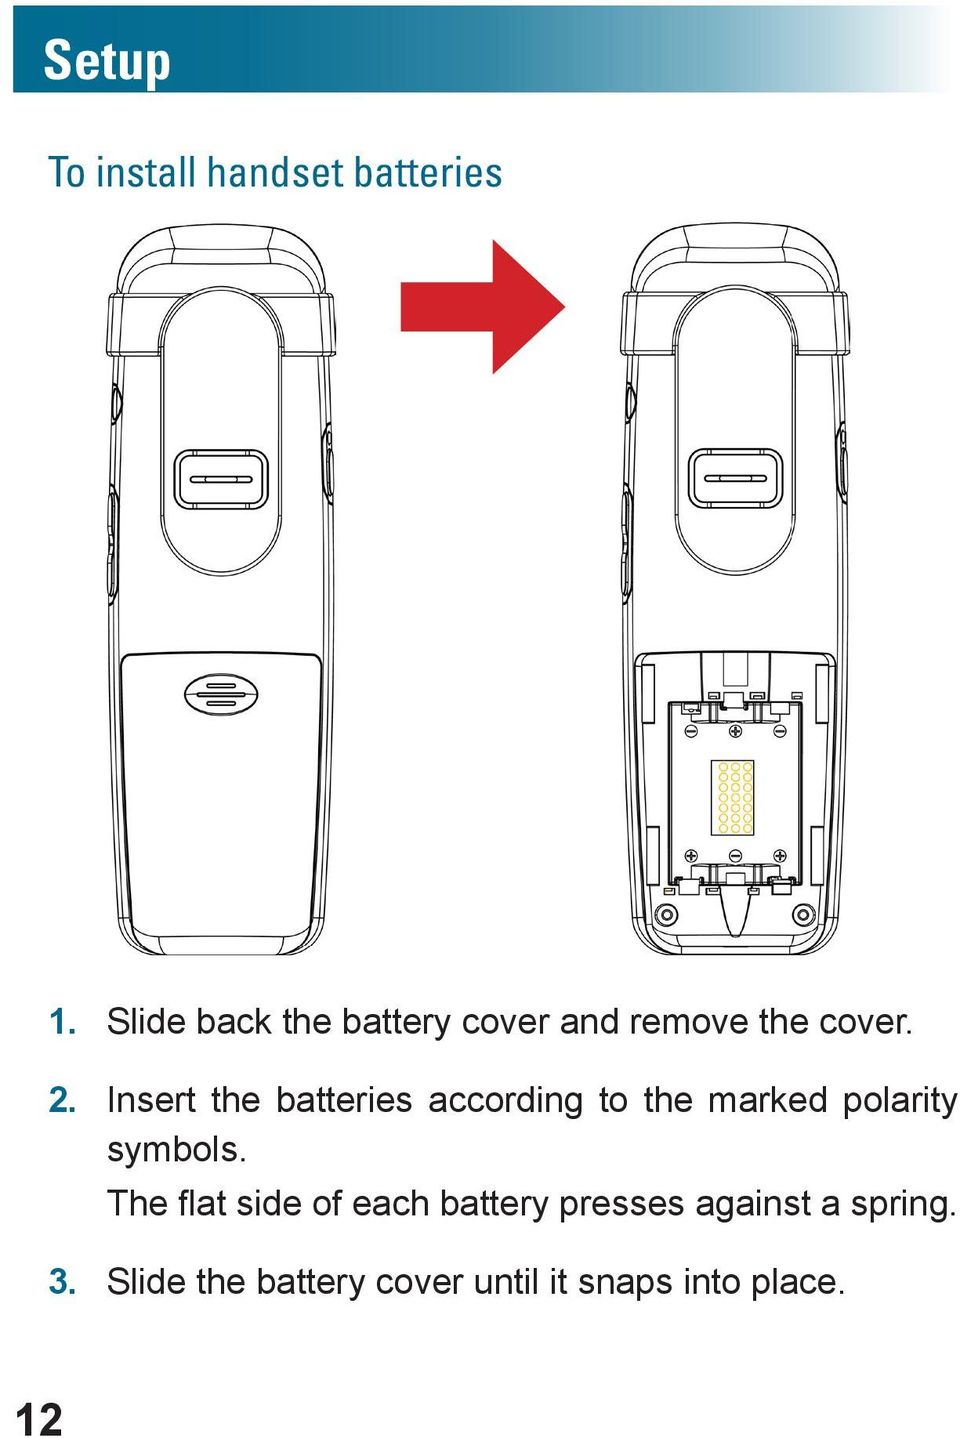 Insert the batteries according to the marked polarity symbols.